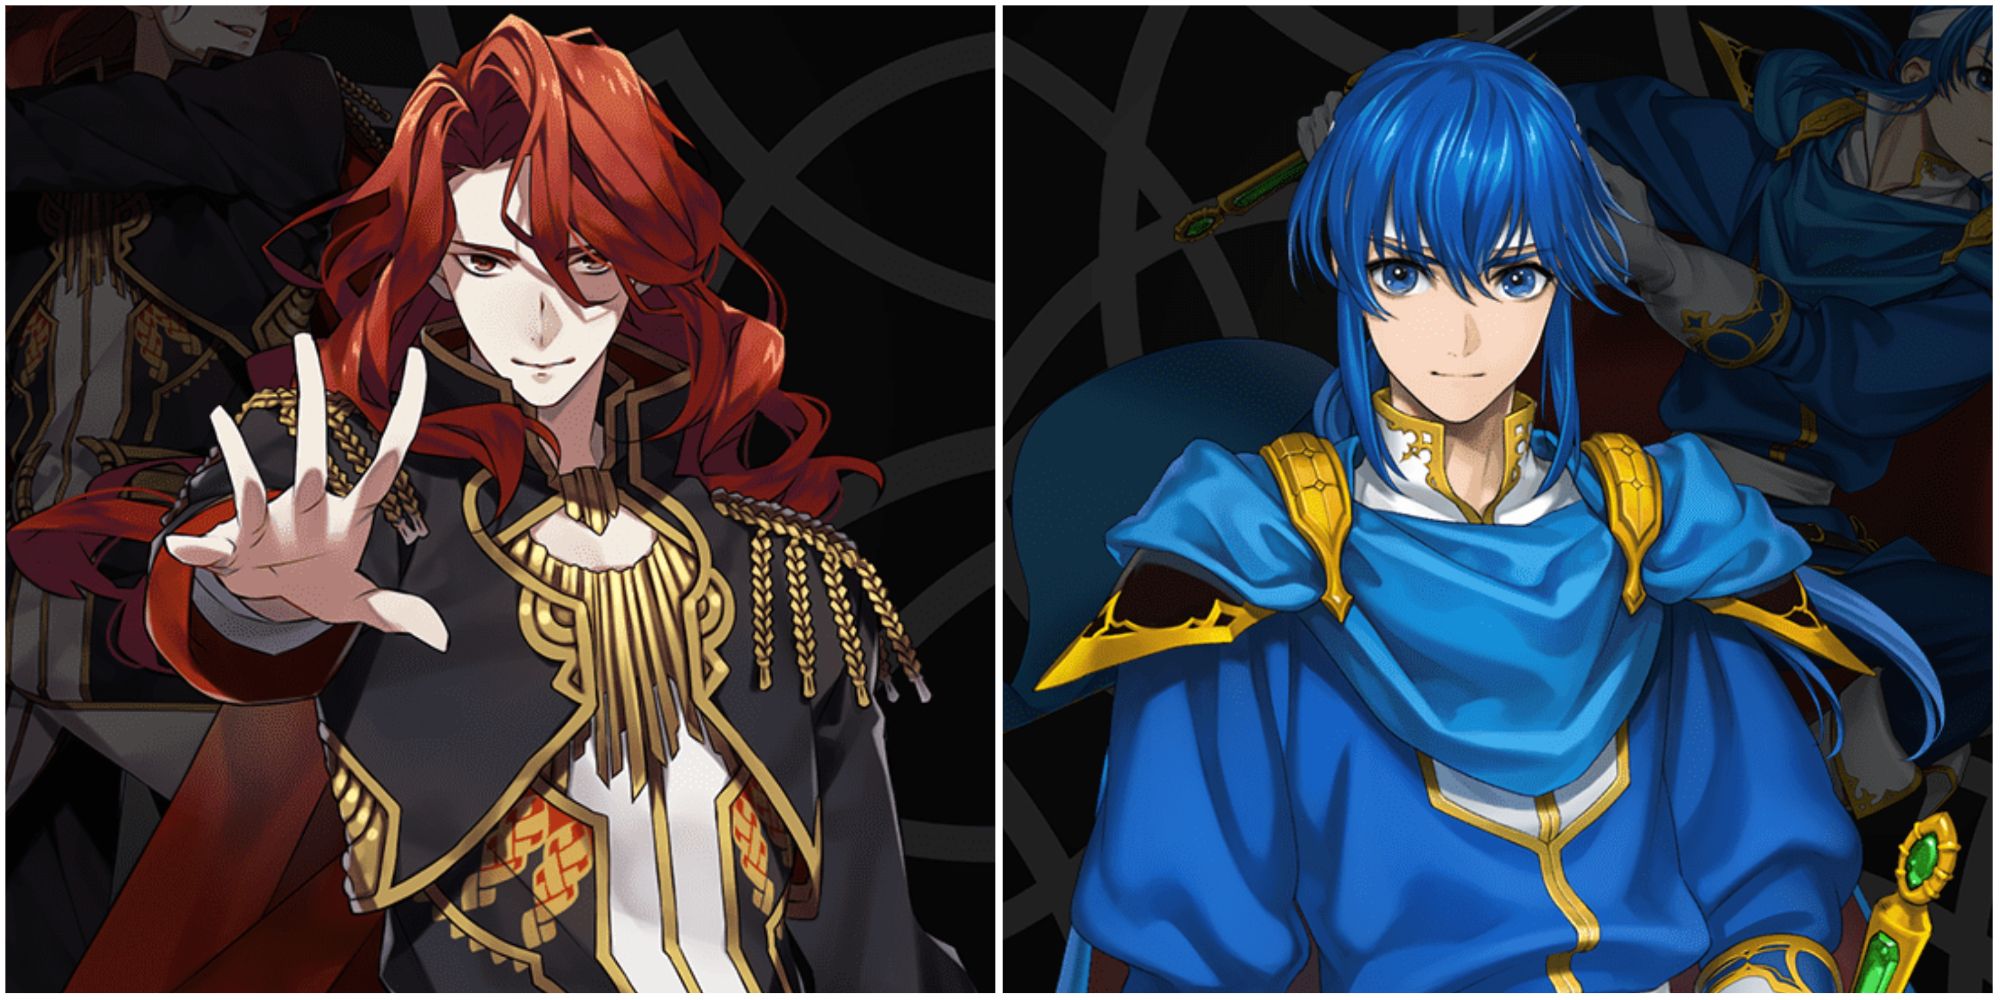 Arvis and Seliph in Fire Emblem